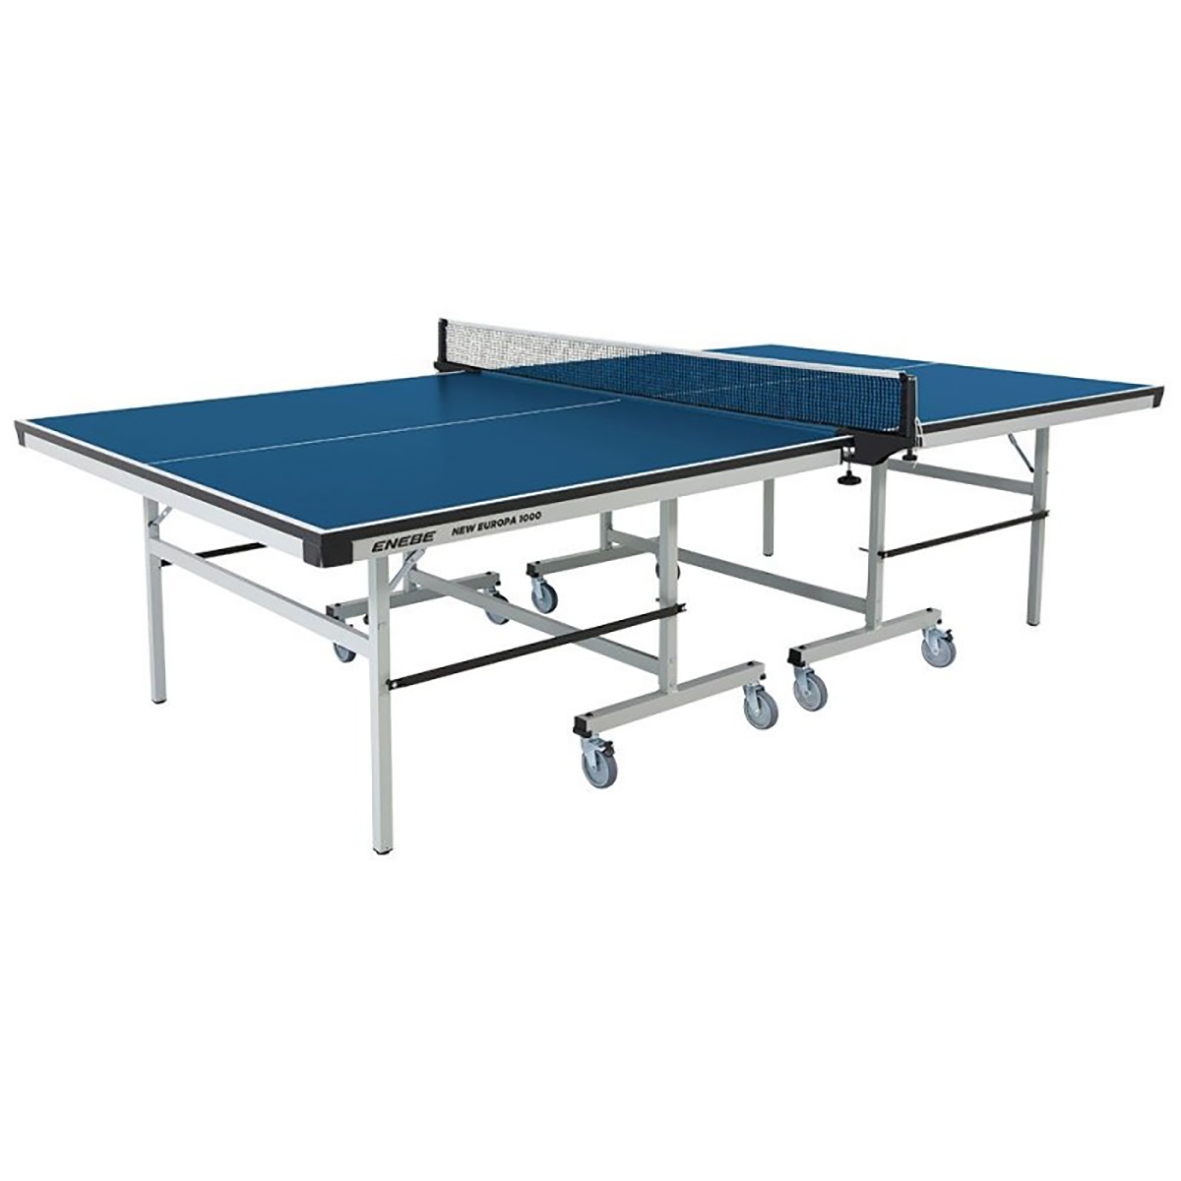 ENEBE EUROPA 1000 COMPETITION TENNIS TABLE.